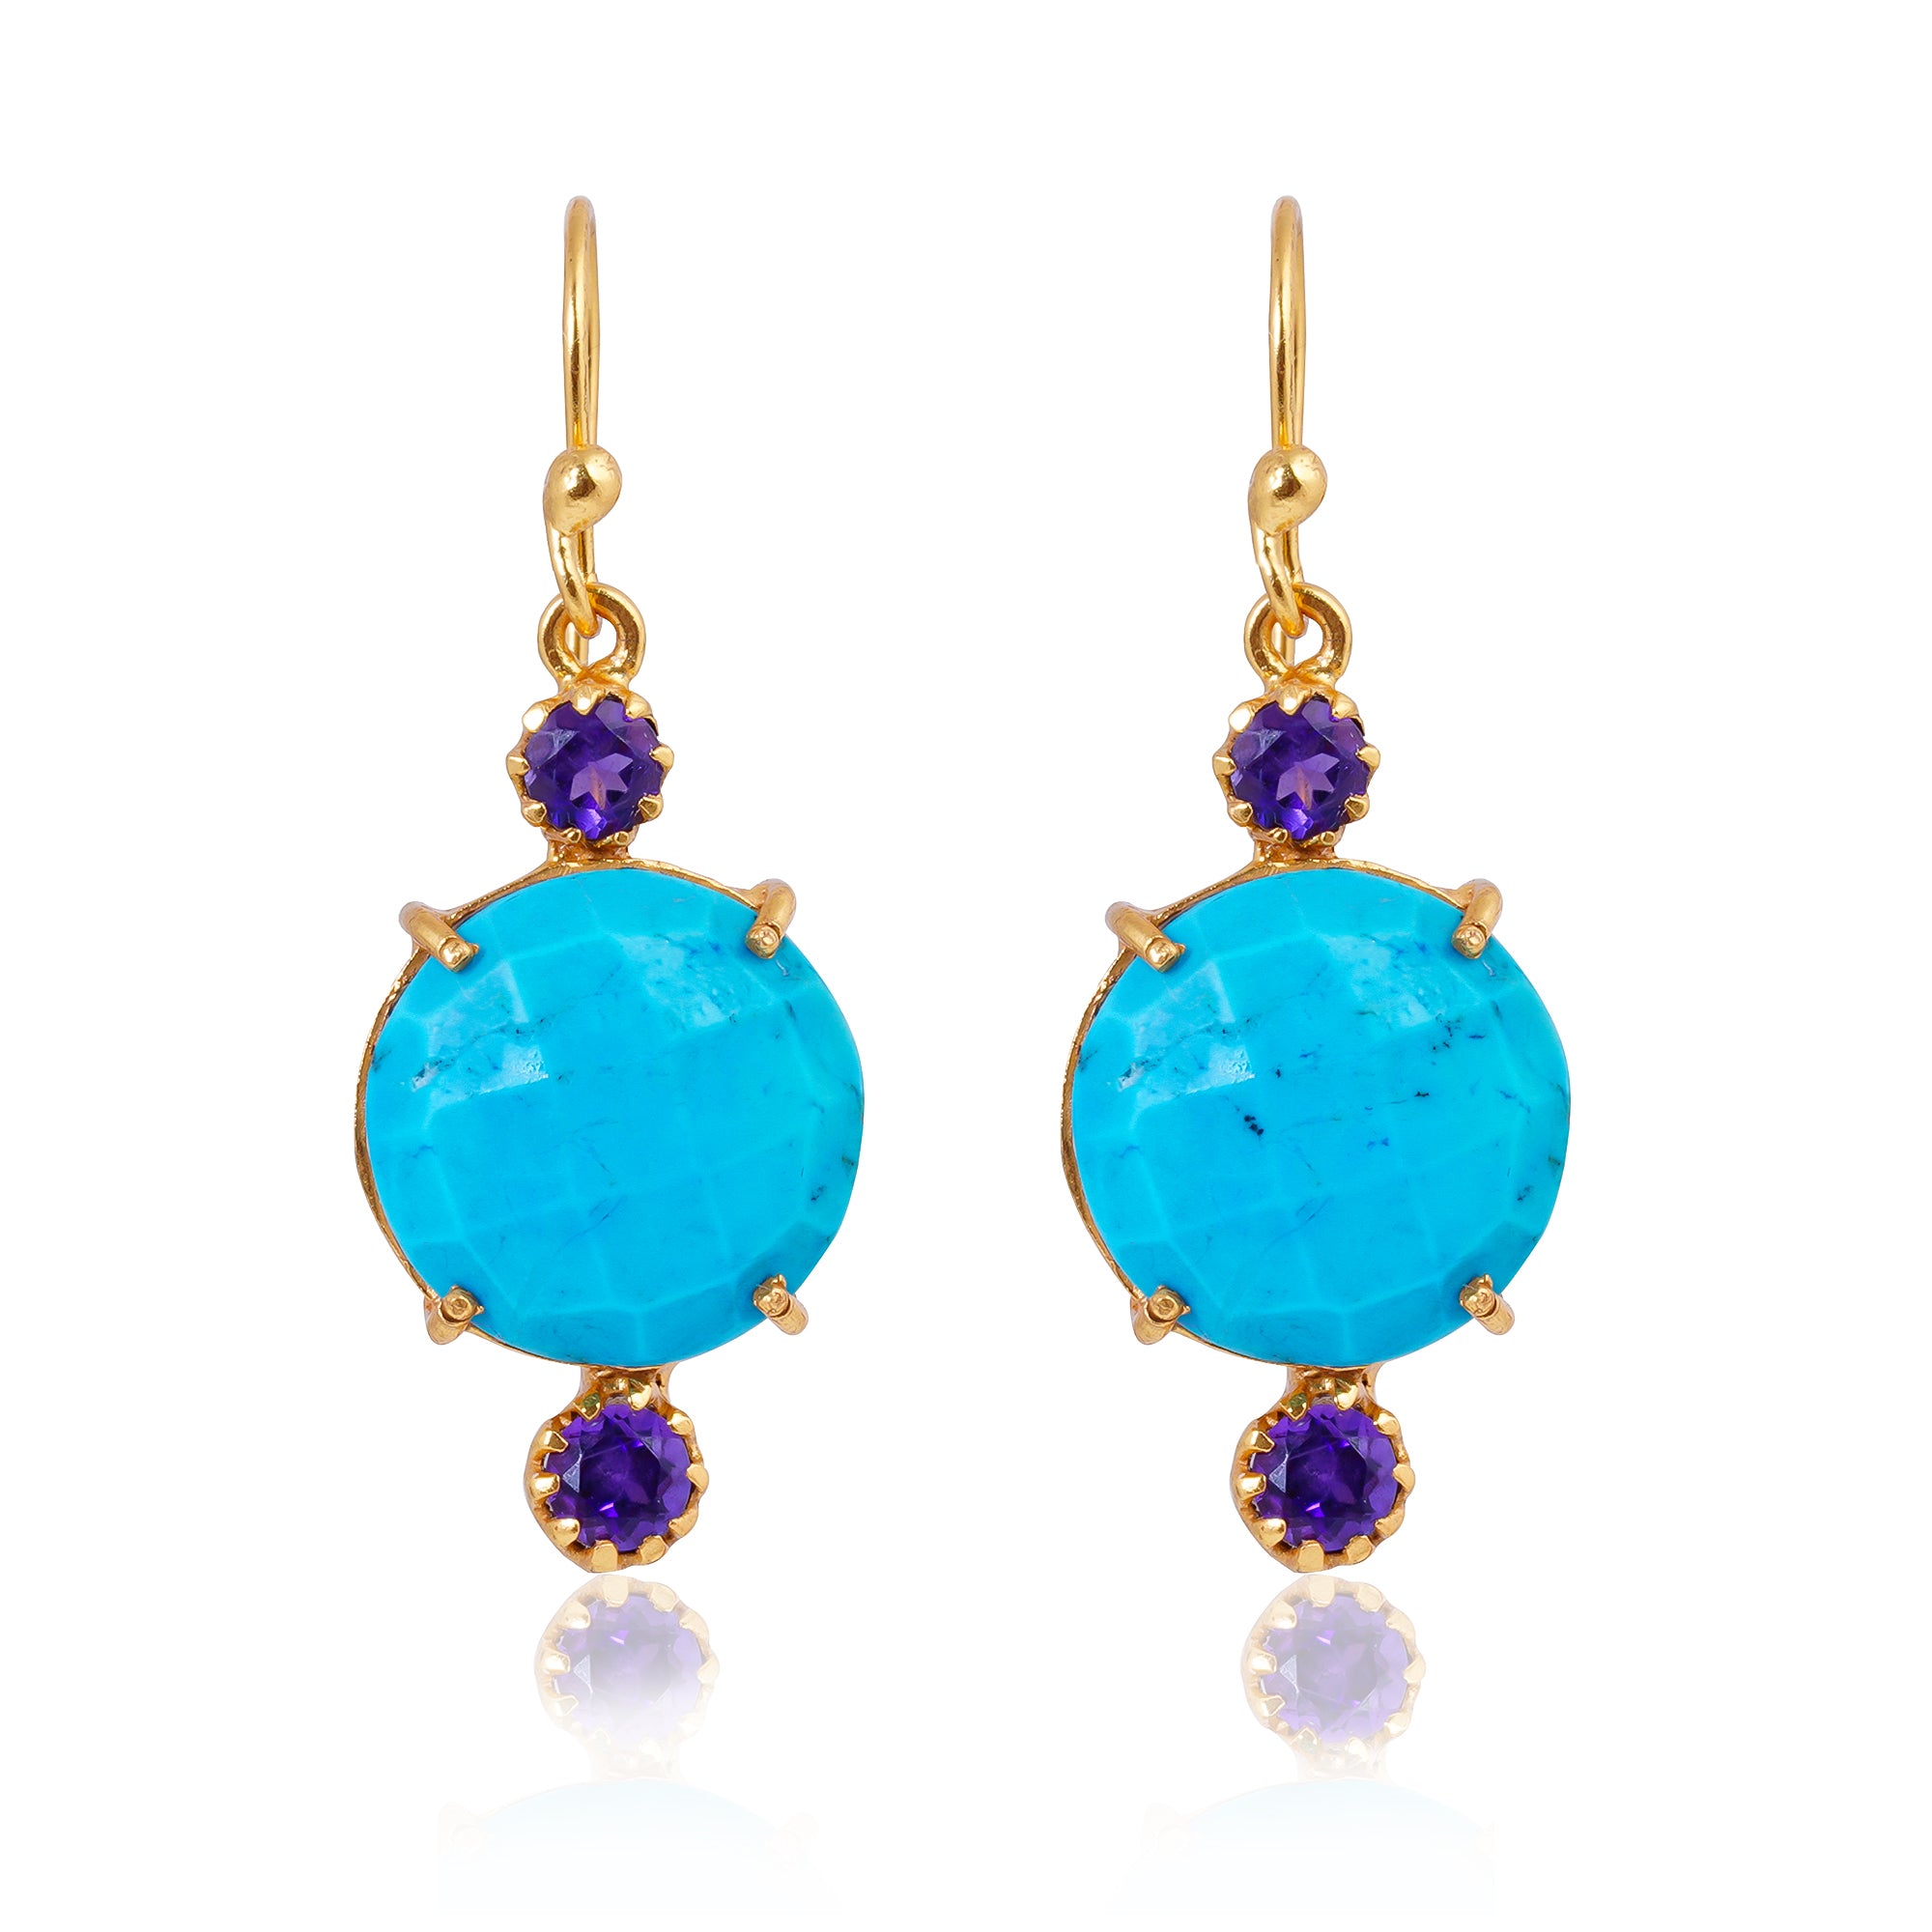 Buy Handmade Silver Gold Plated Turquoise / Amethyst Earring